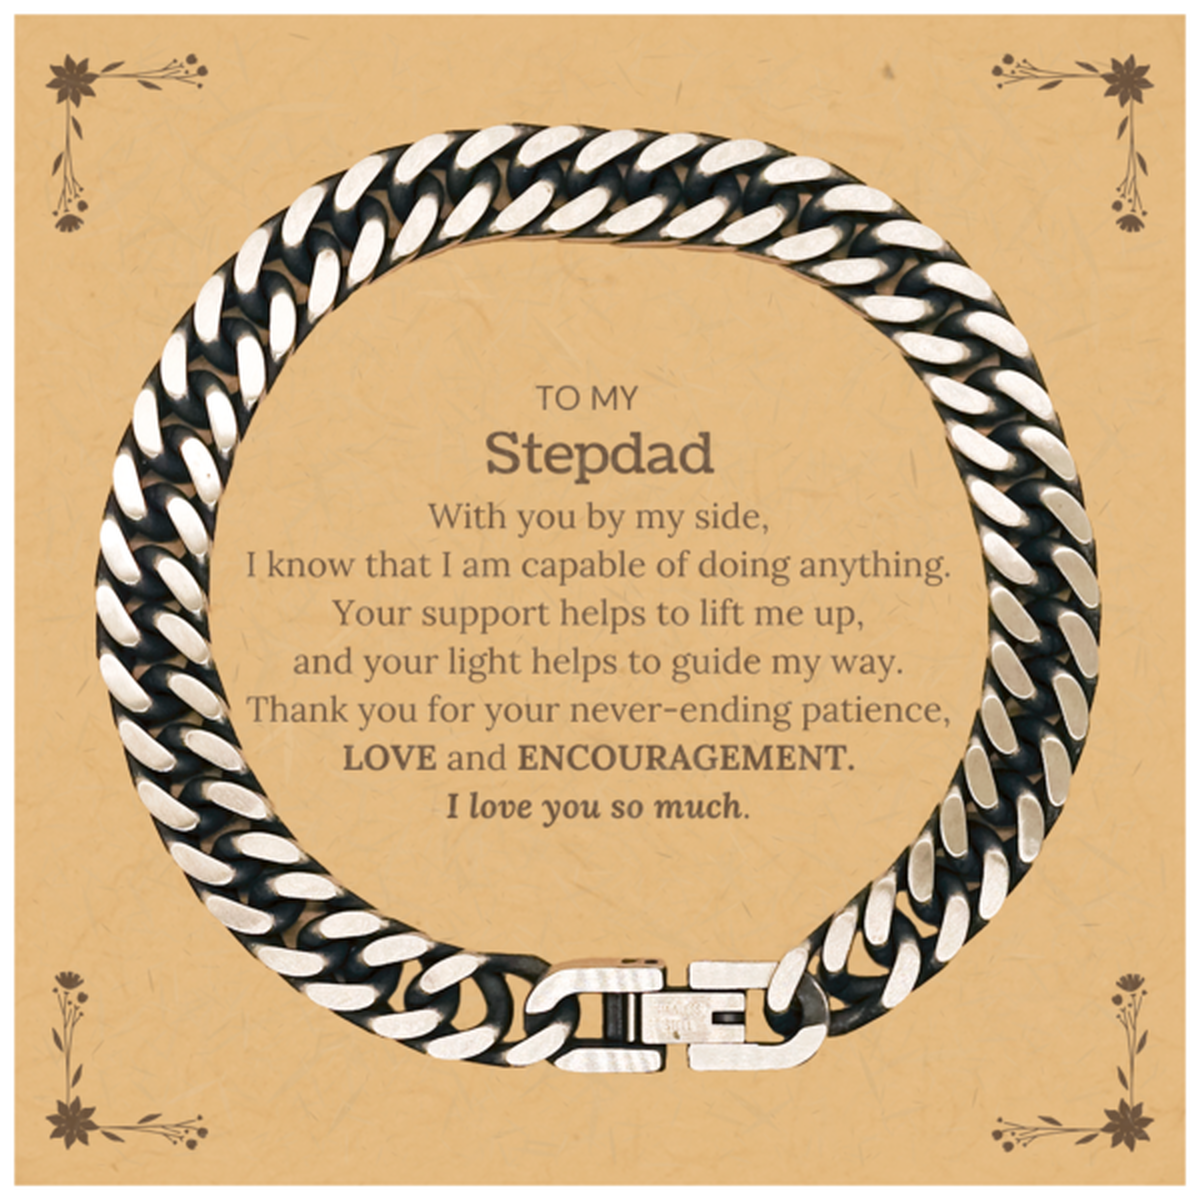 Appreciation Stepdad Cuban Link Chain Bracelet Gifts, To My Stepdad Birthday Christmas Wedding Keepsake Gifts for Stepdad With you by my side, I know that I am capable of doing anything. I love you so much